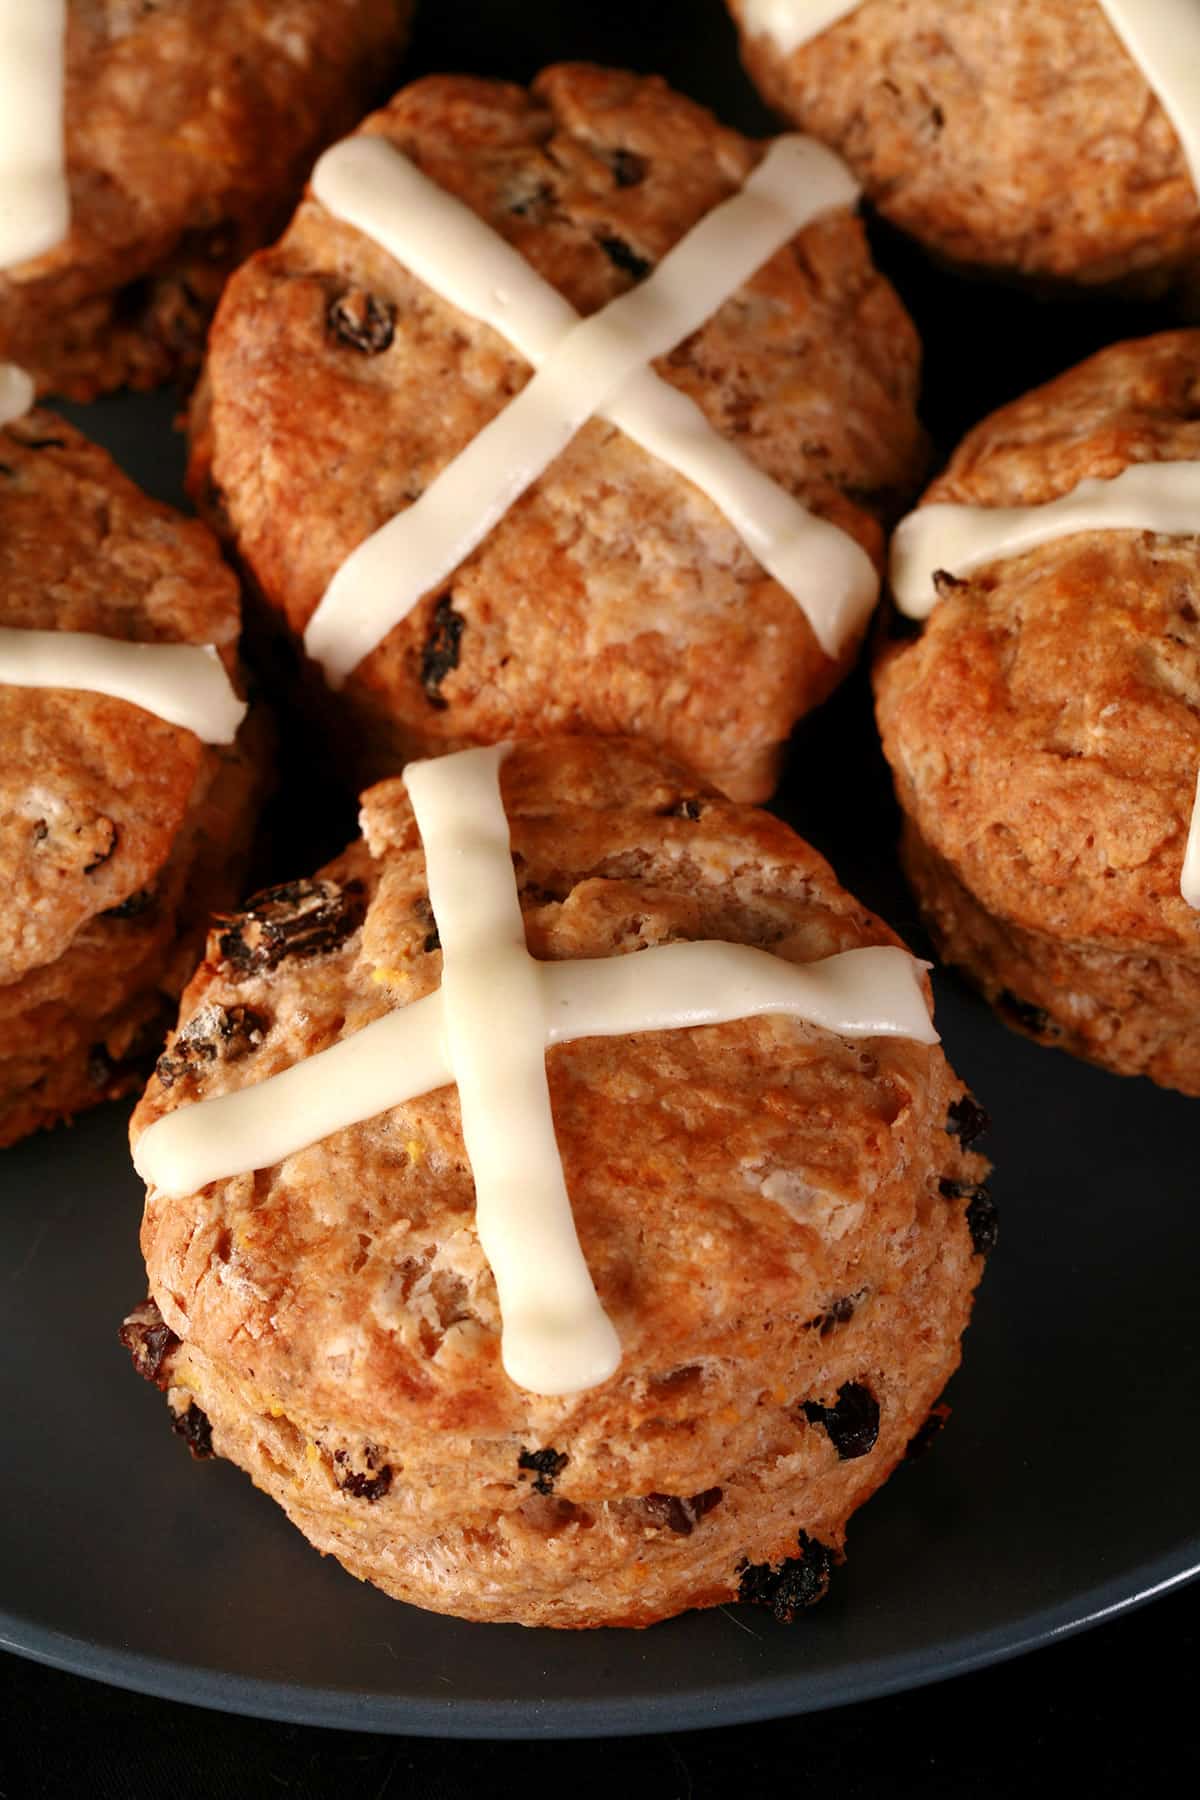 A plate of hot cross scones with orange frosting on top.